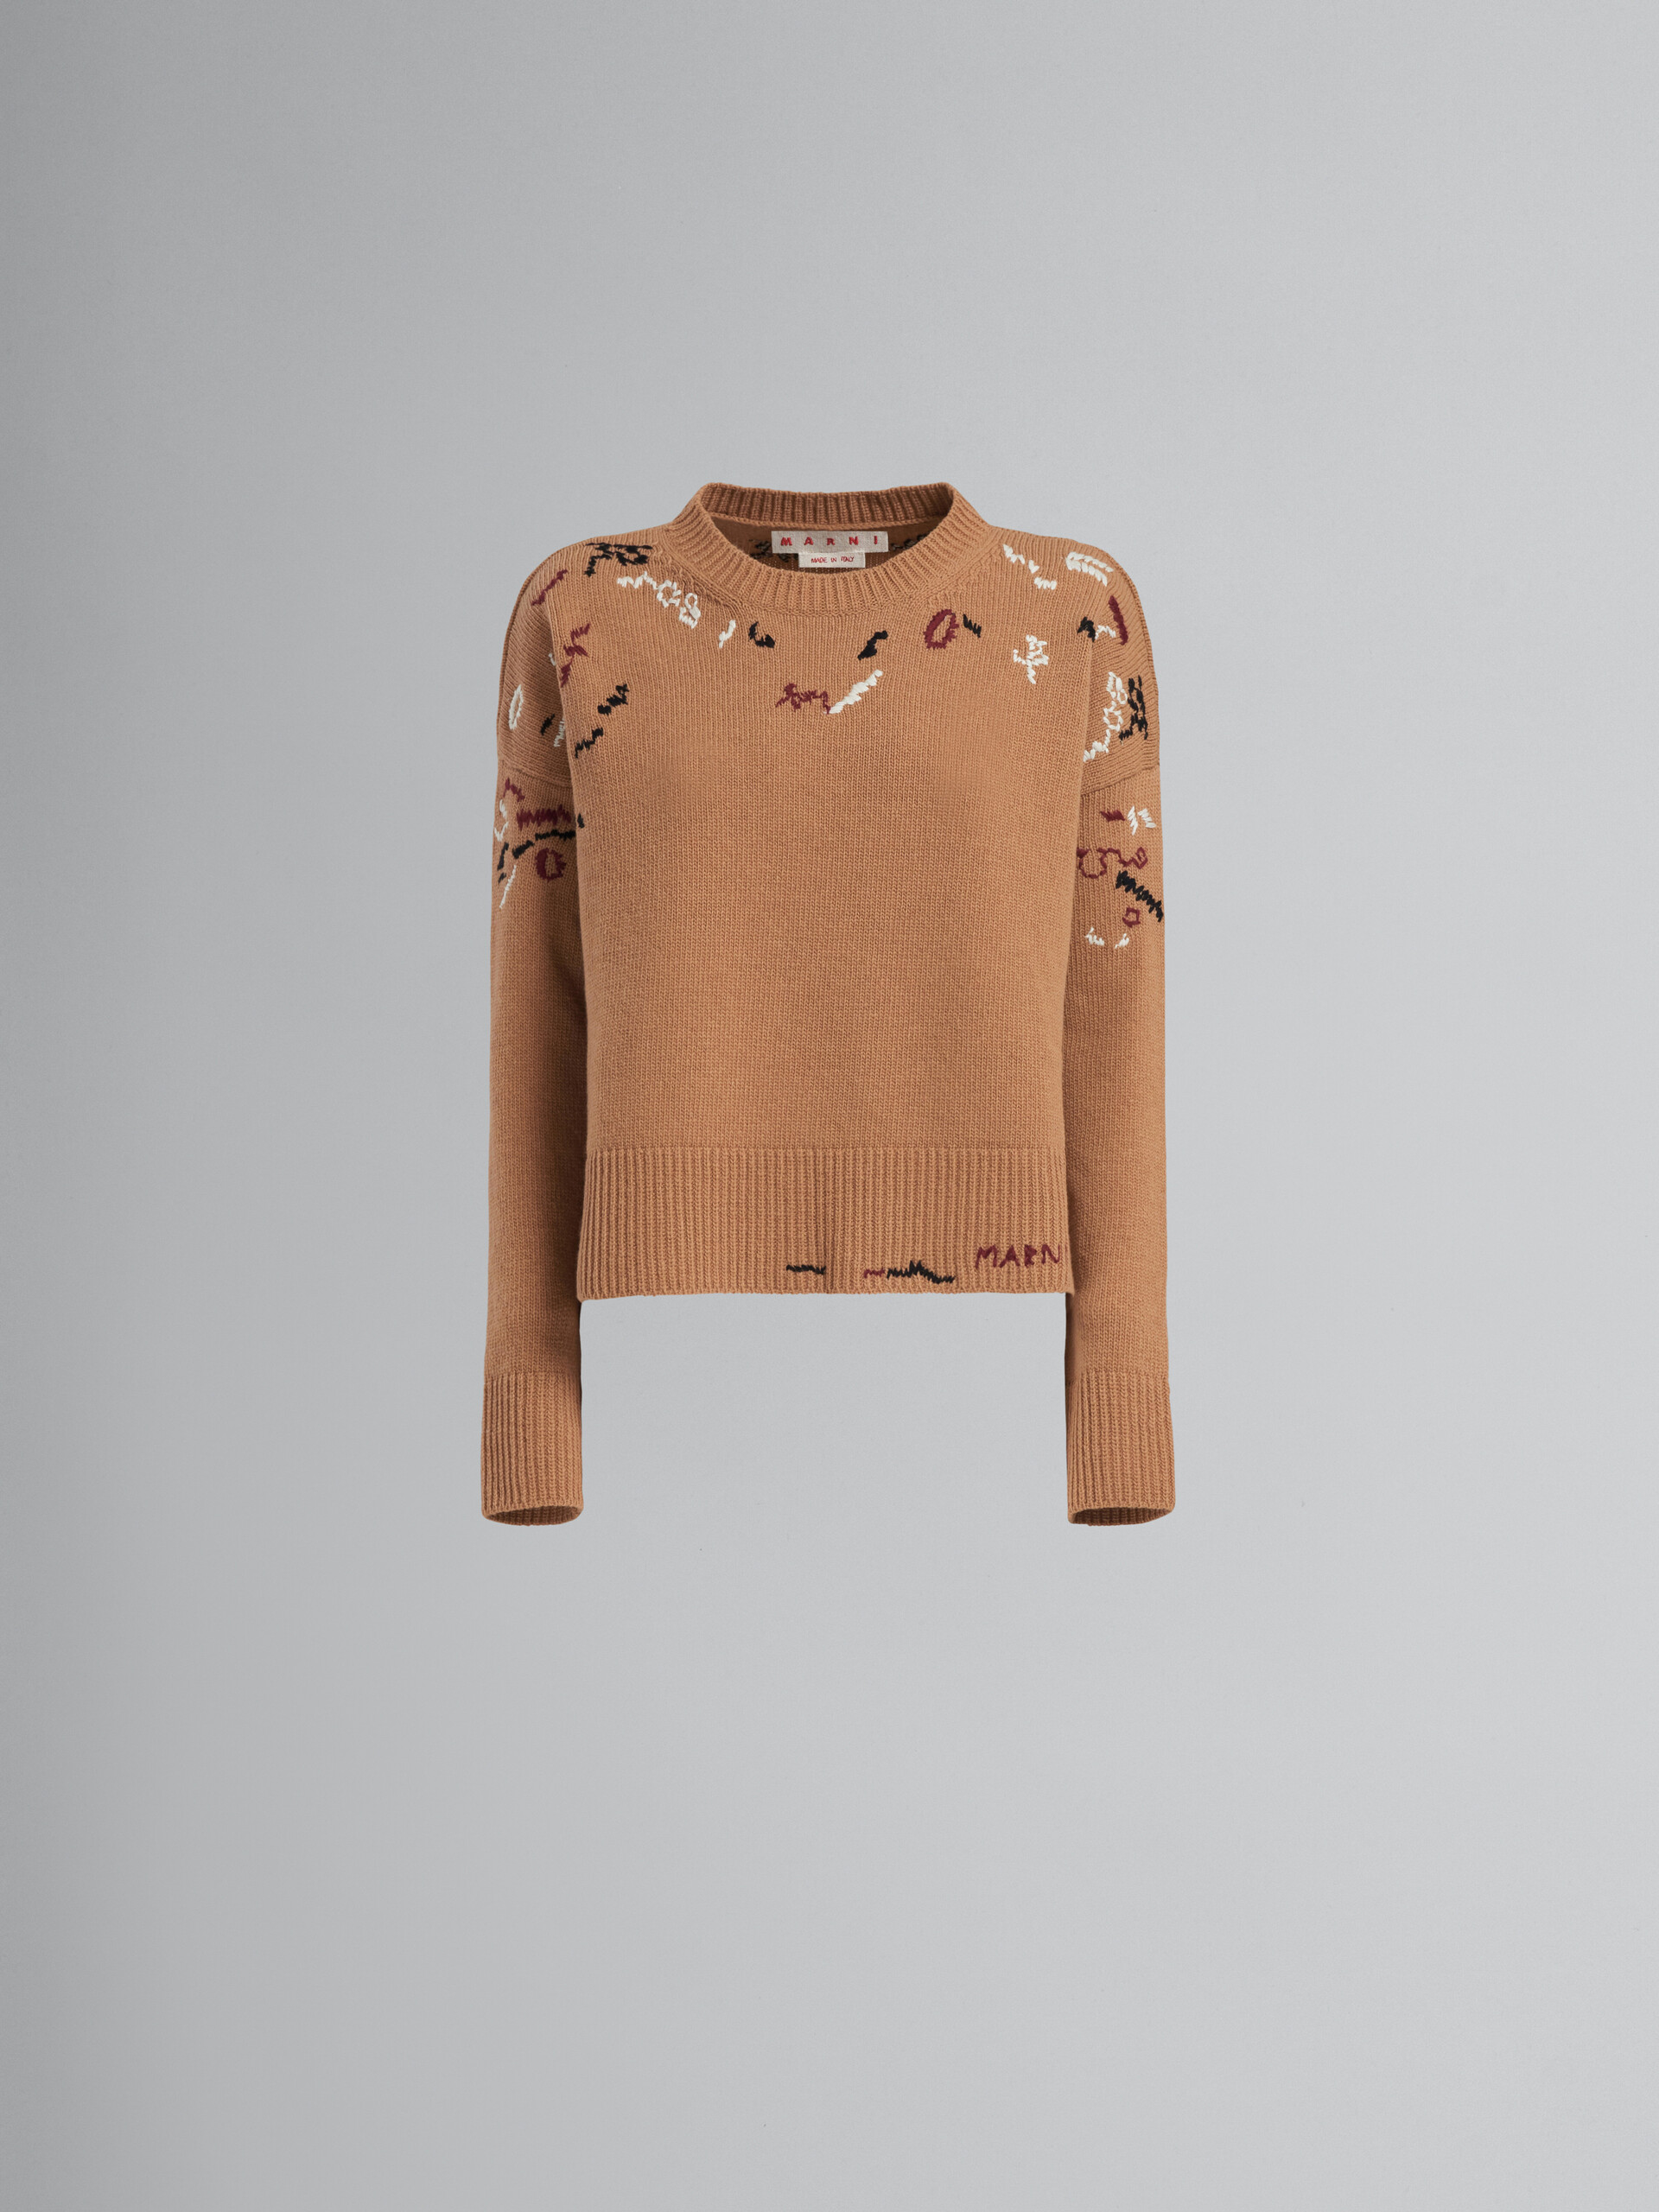 Beige wool sweater with raw-edge detailing - Pullovers - Image 1